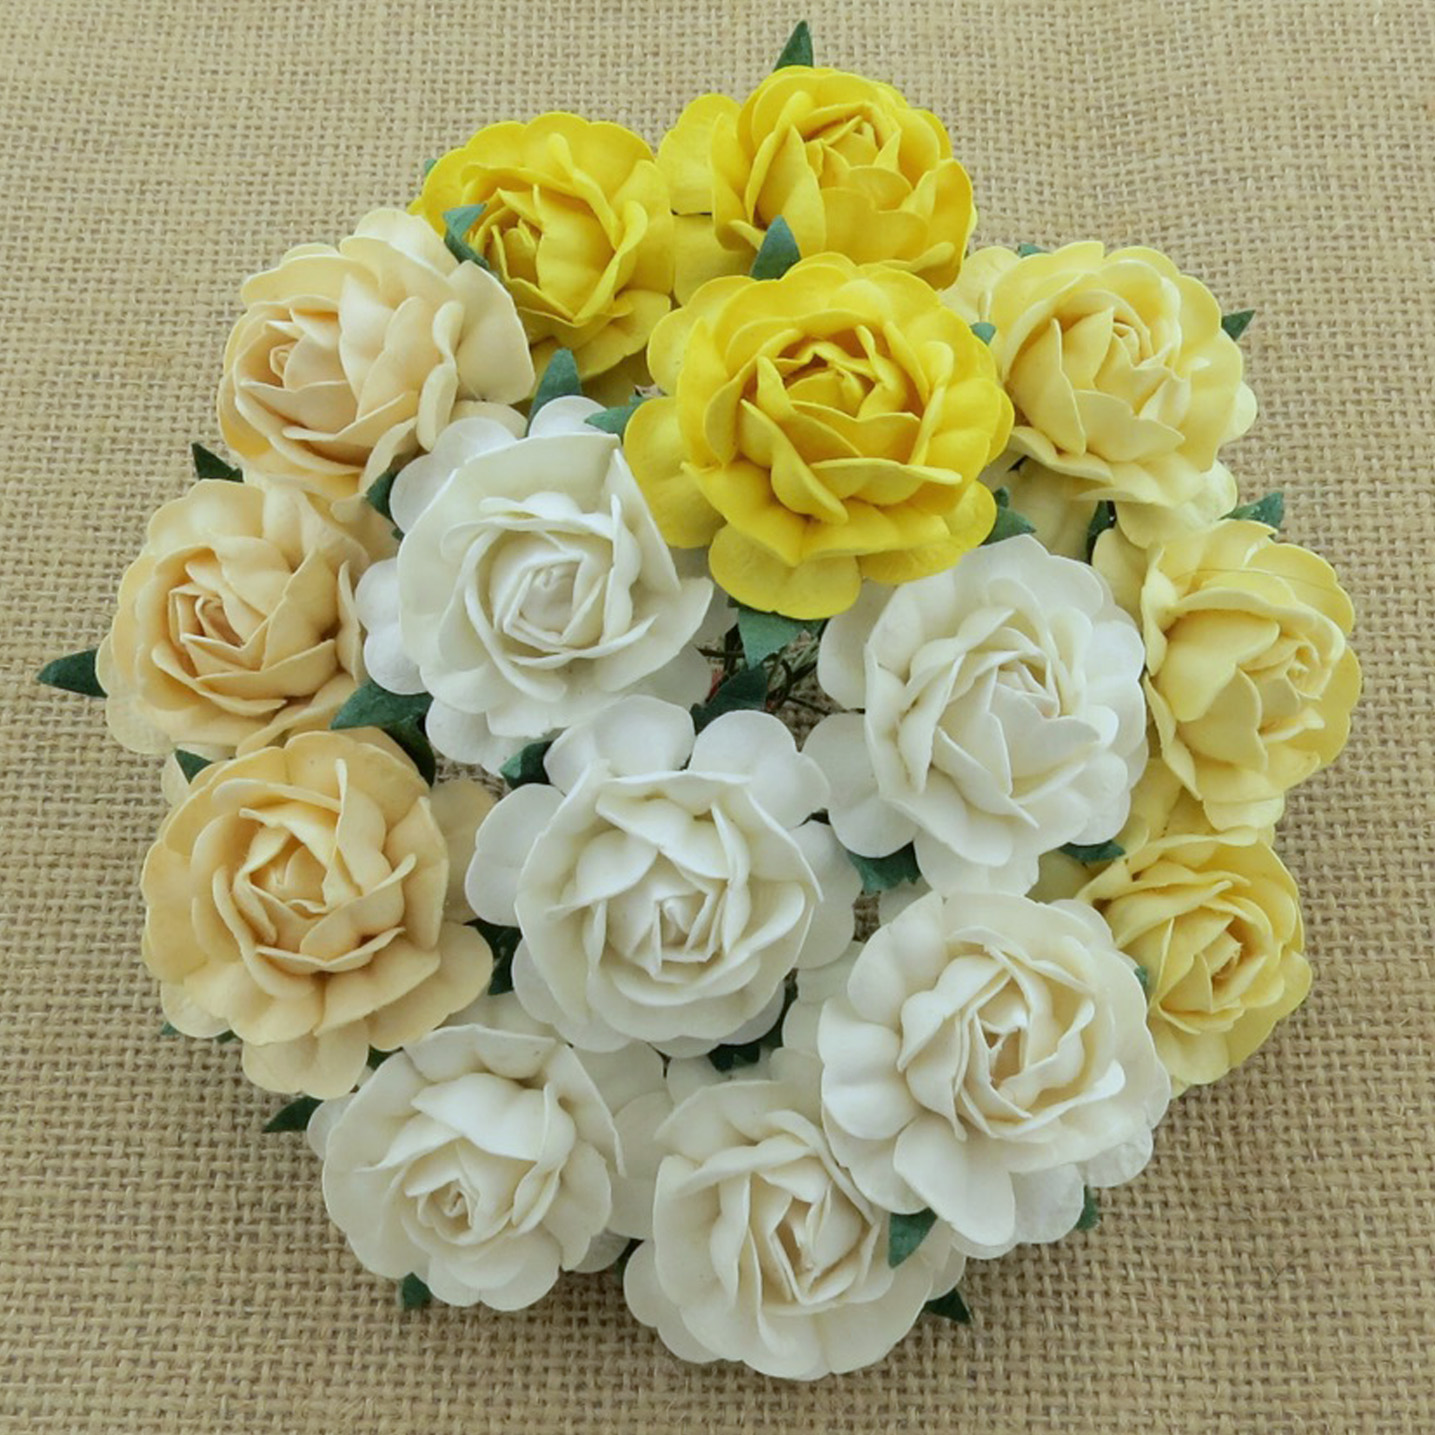 50 MIXED WHITE/CREAM MULBERRY PAPER TEA ROSES 40mm - 5 COLOR